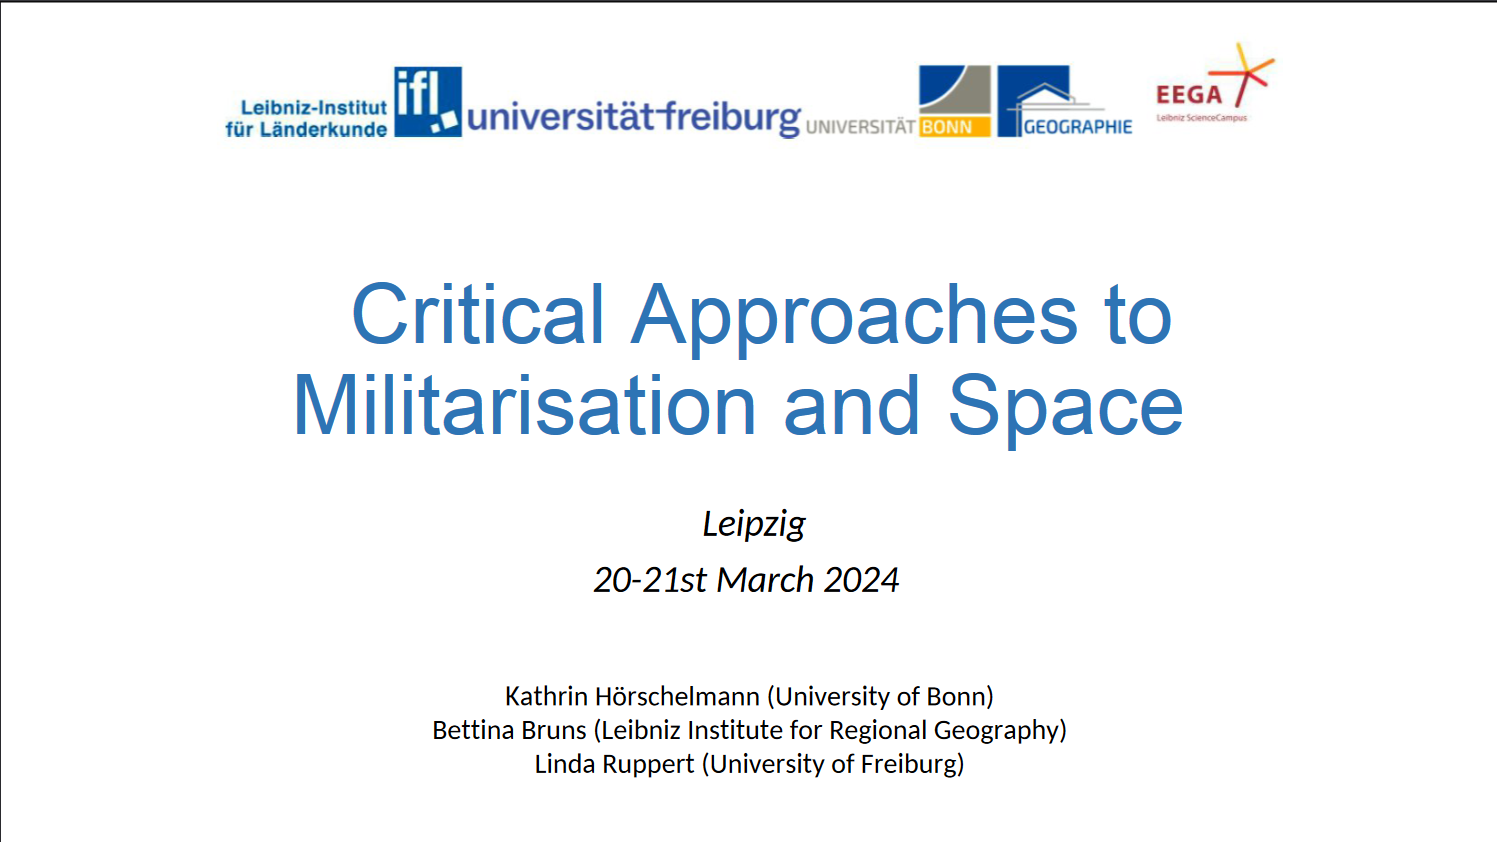 Critical Approaches to Militarisation and Space - Introduction_CAMS